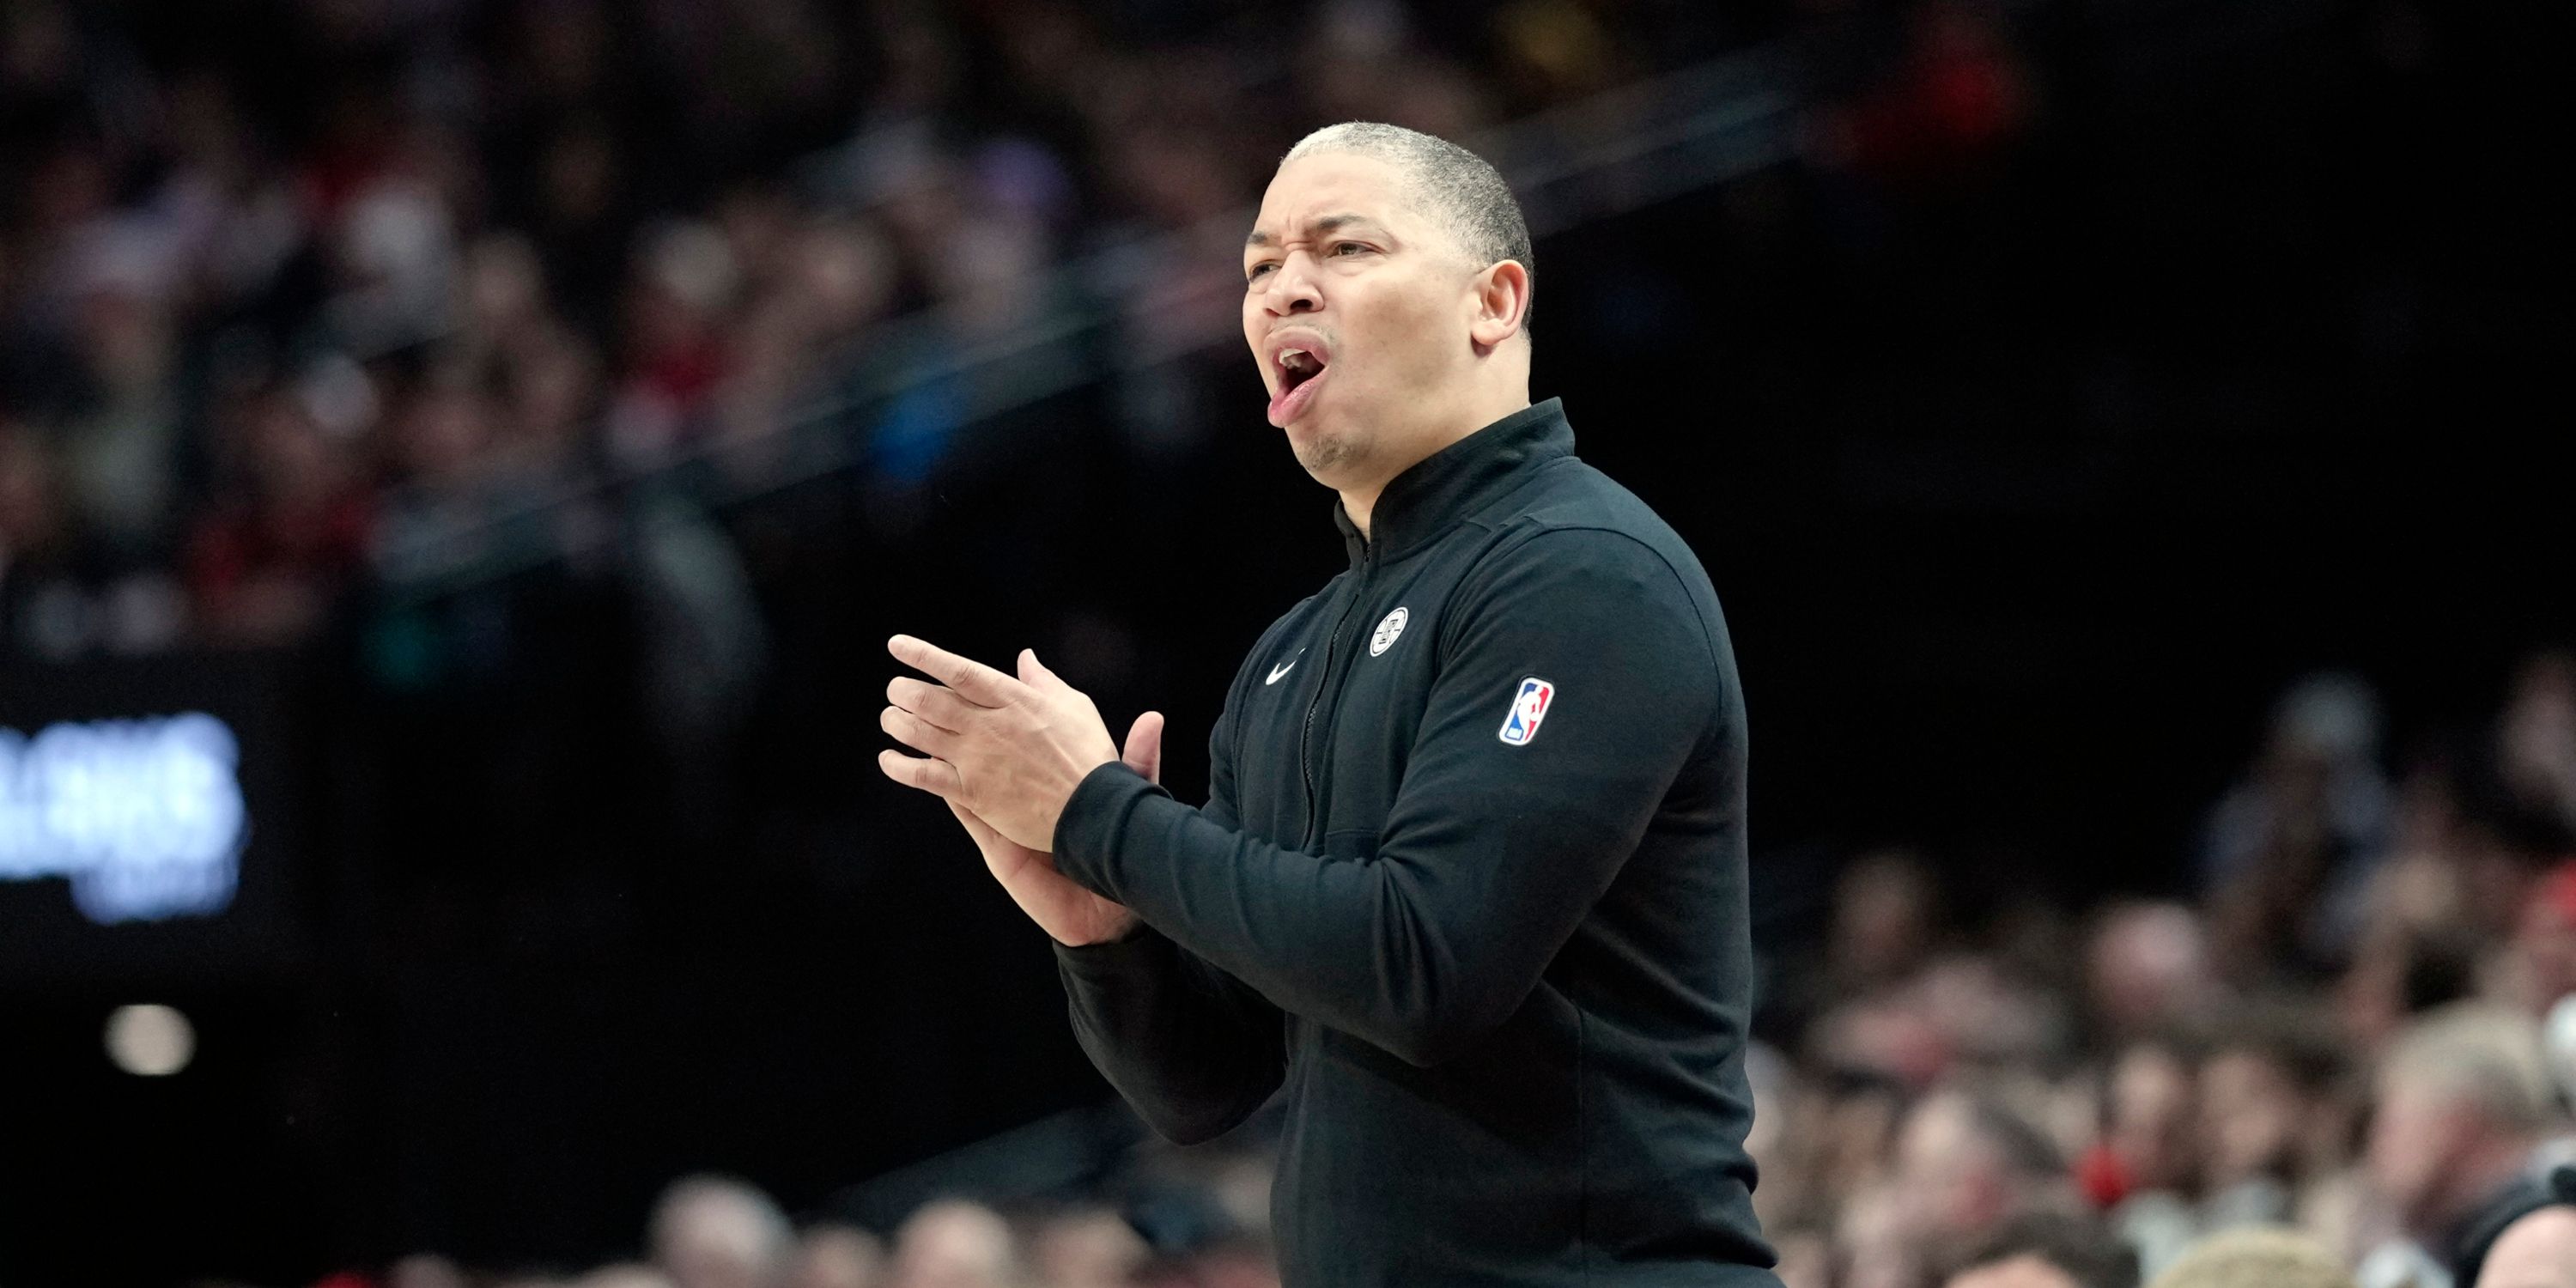 Tyronn Lue, Los Angeles Clippers